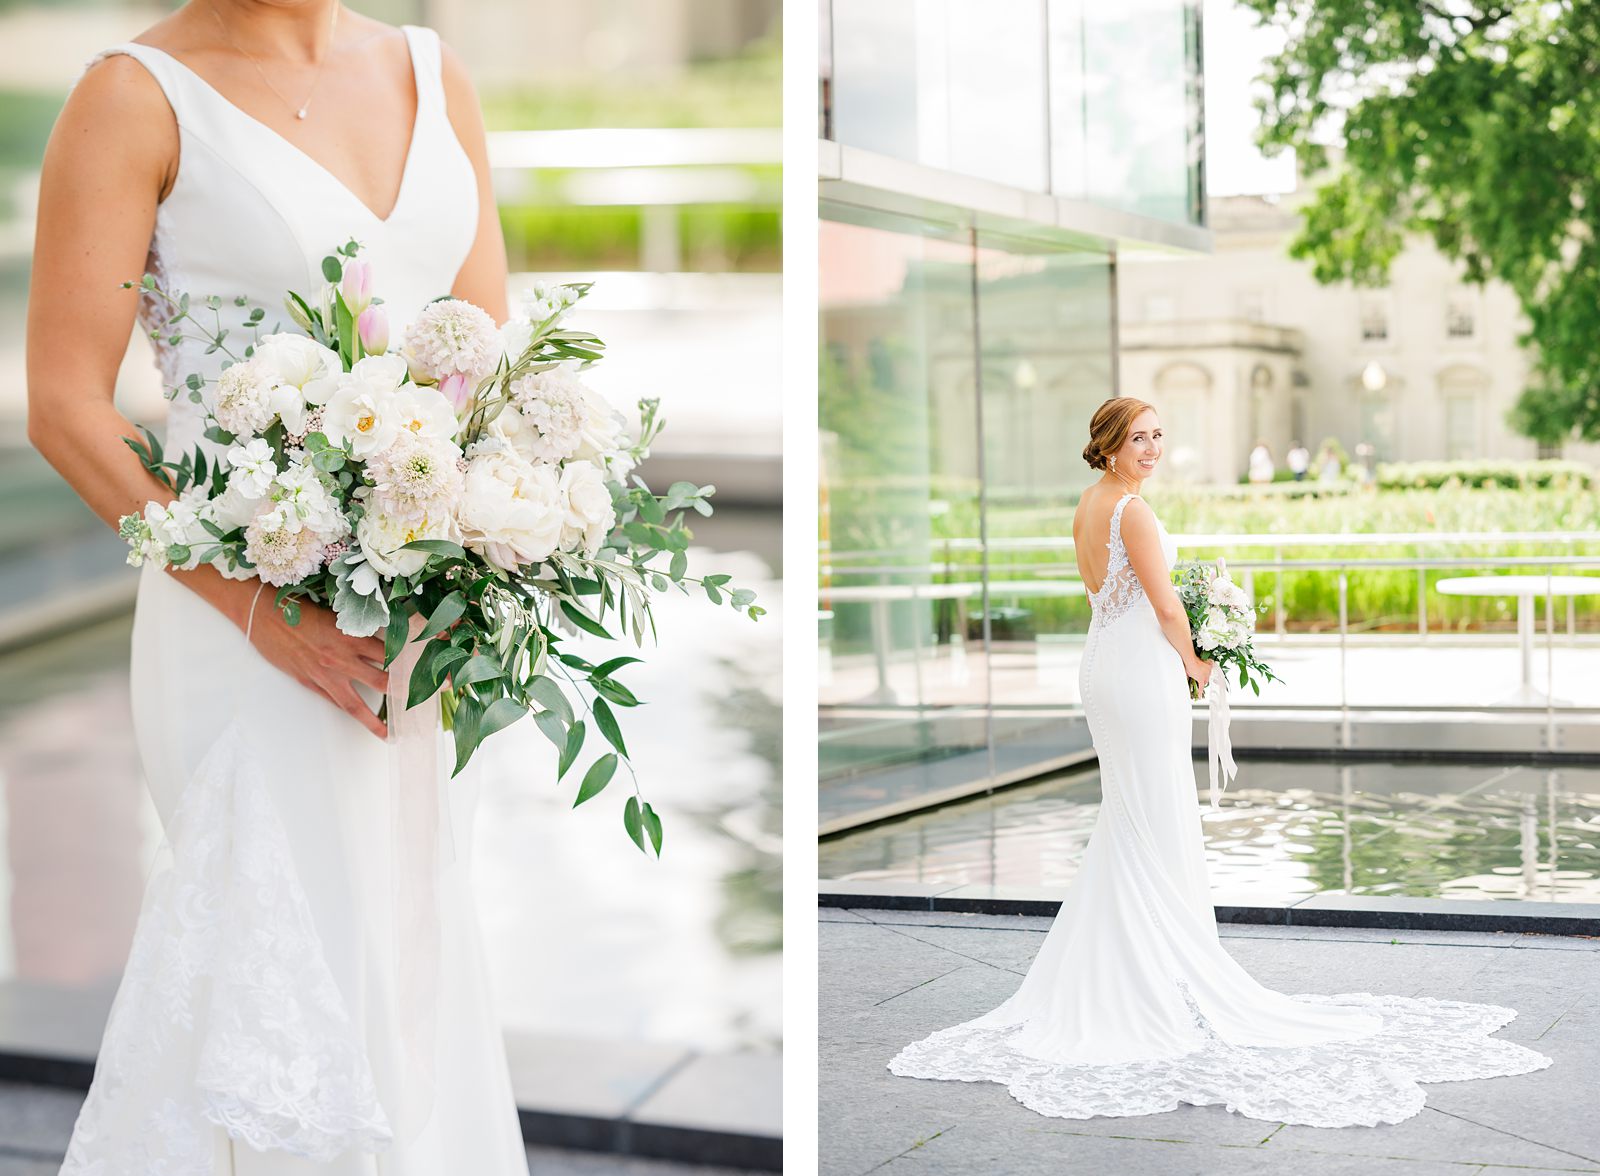 Bridal Portraits at Summer VMFA Wedding in Richmond by Kailey Brianne Photography 